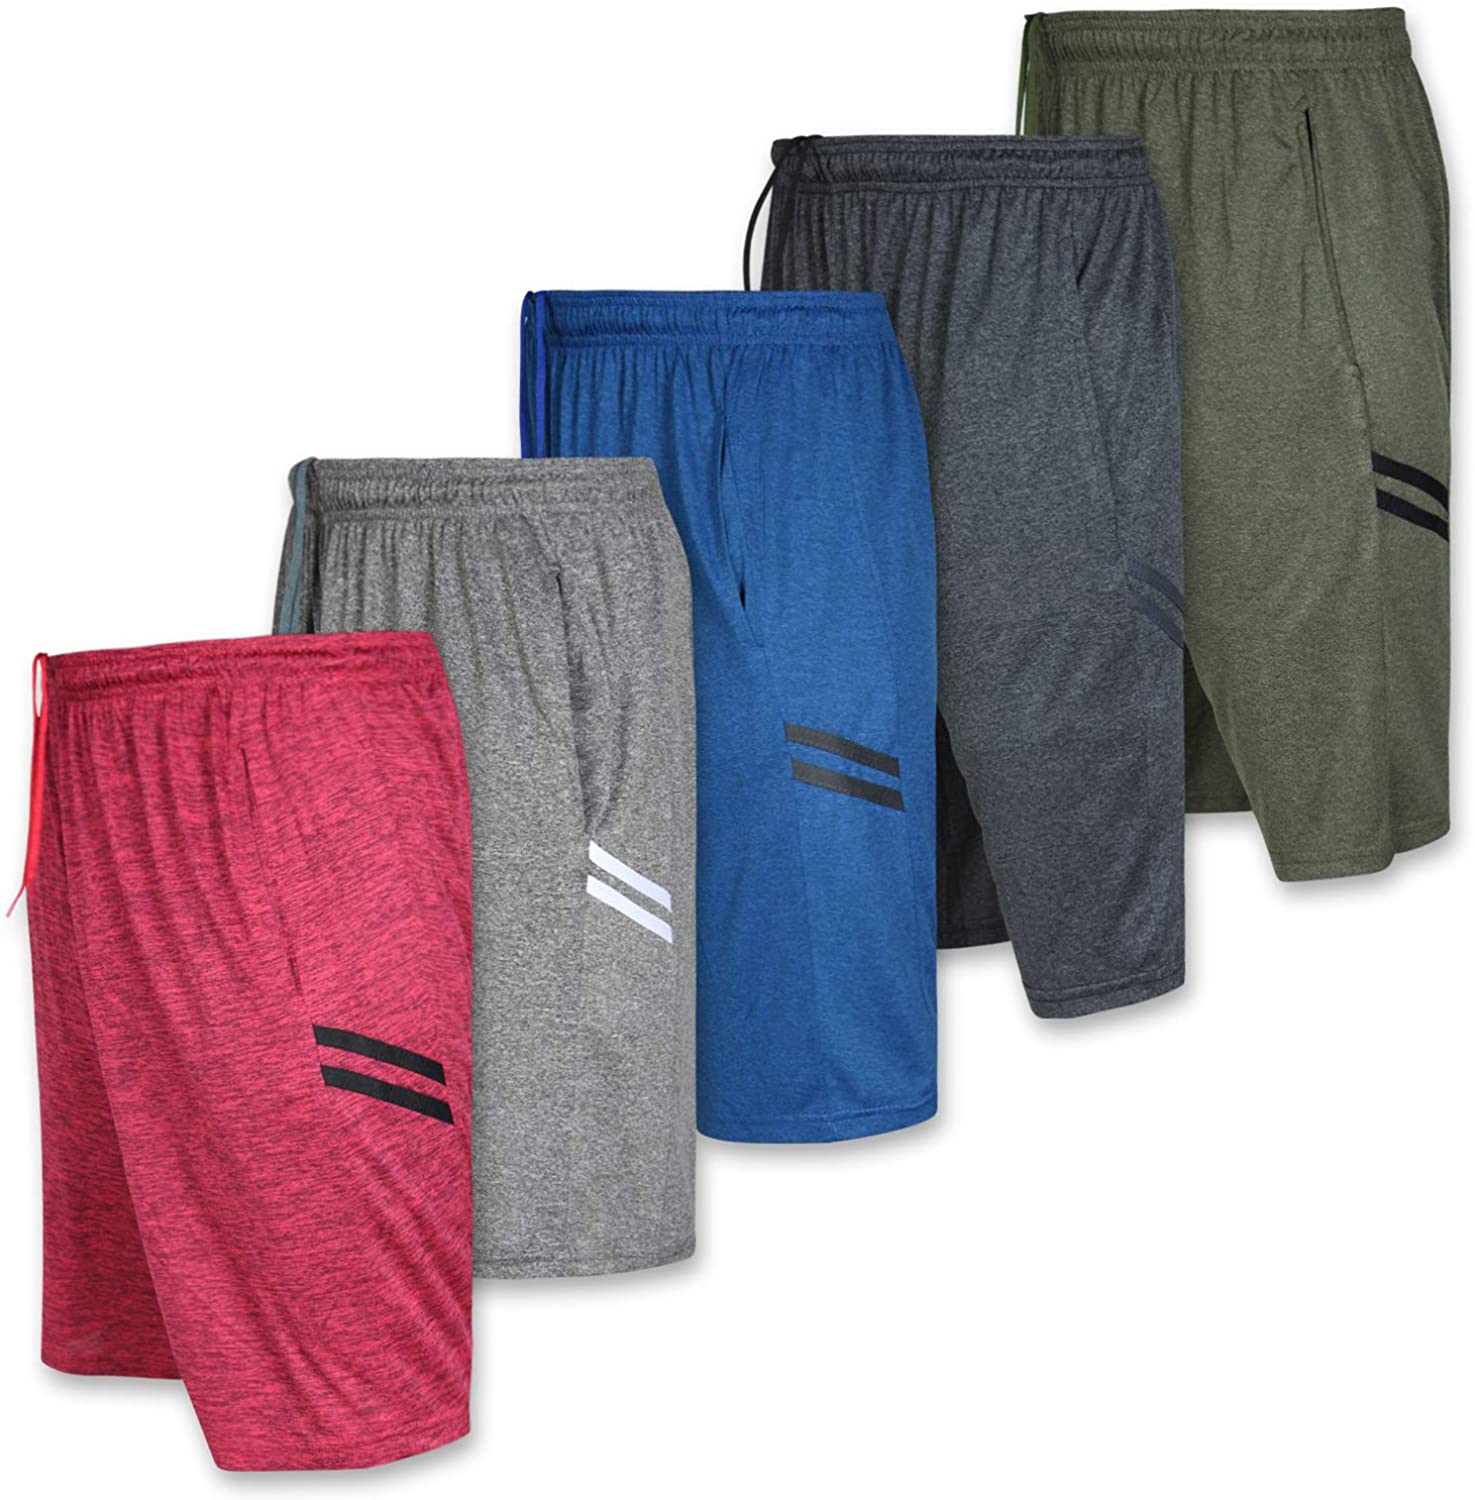 5 Pack:Men's Dry-Fit Sweat Resistant Active Athletic Performance Shorts -  Set E - CT18HZ2K9CA Size Small